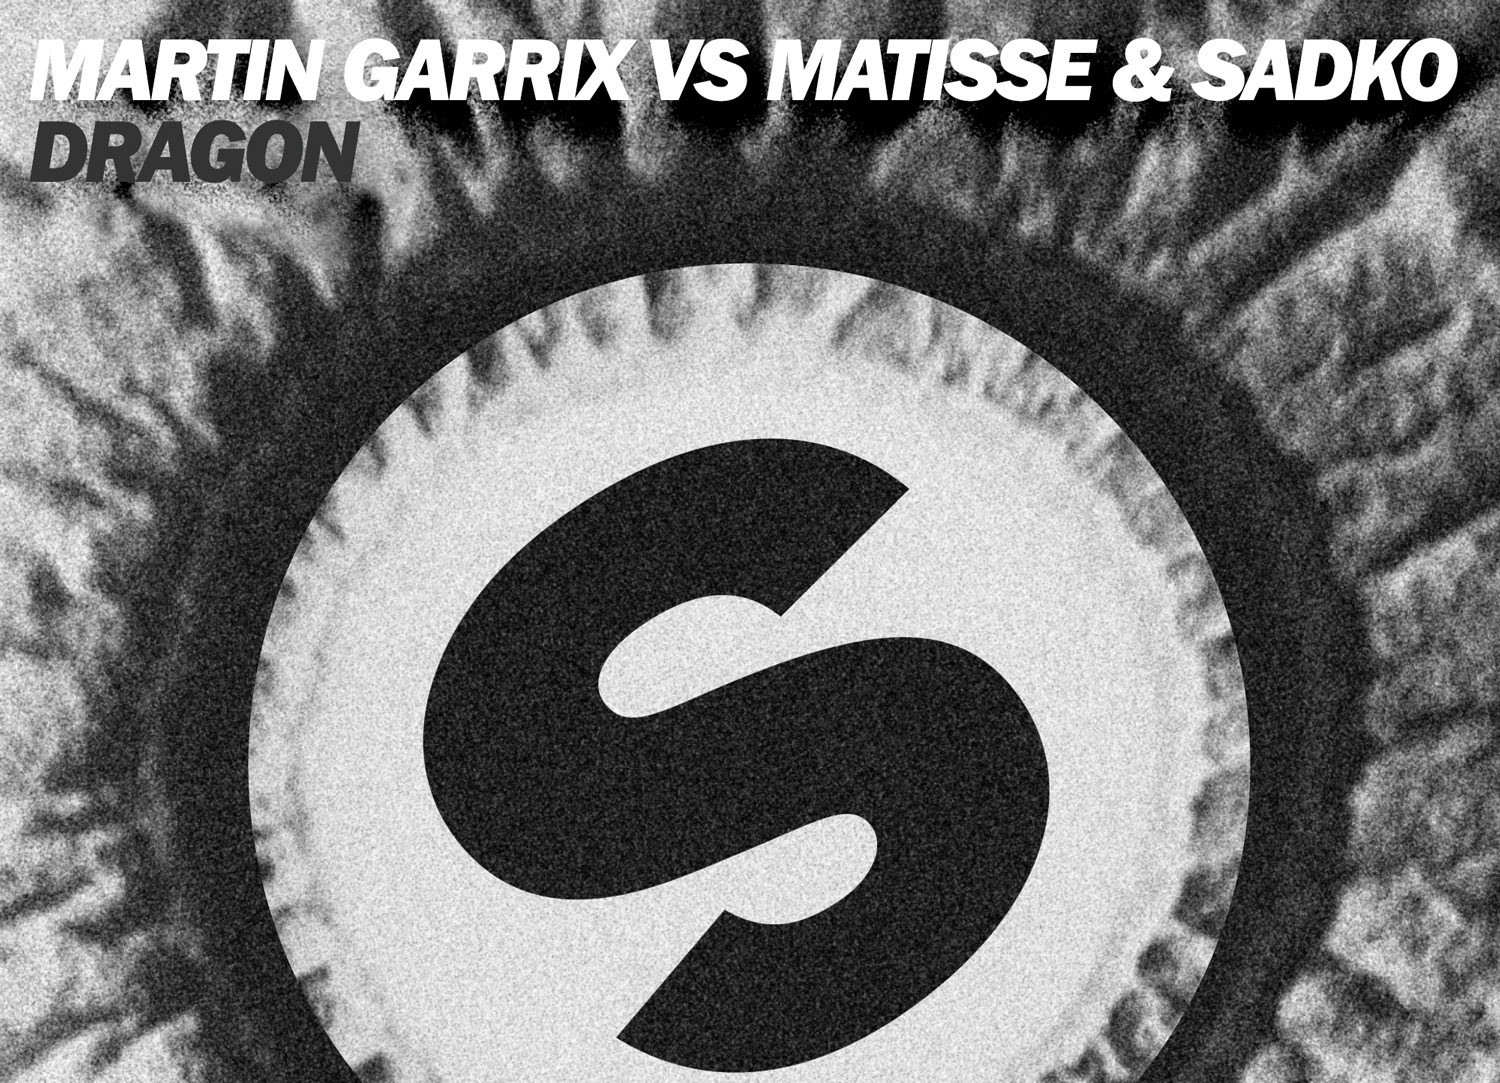 Martin Garrix With Matisse & Sadko Release 'Dragon' on Spinnin' Records  With Music Video | The Nocturnal Times